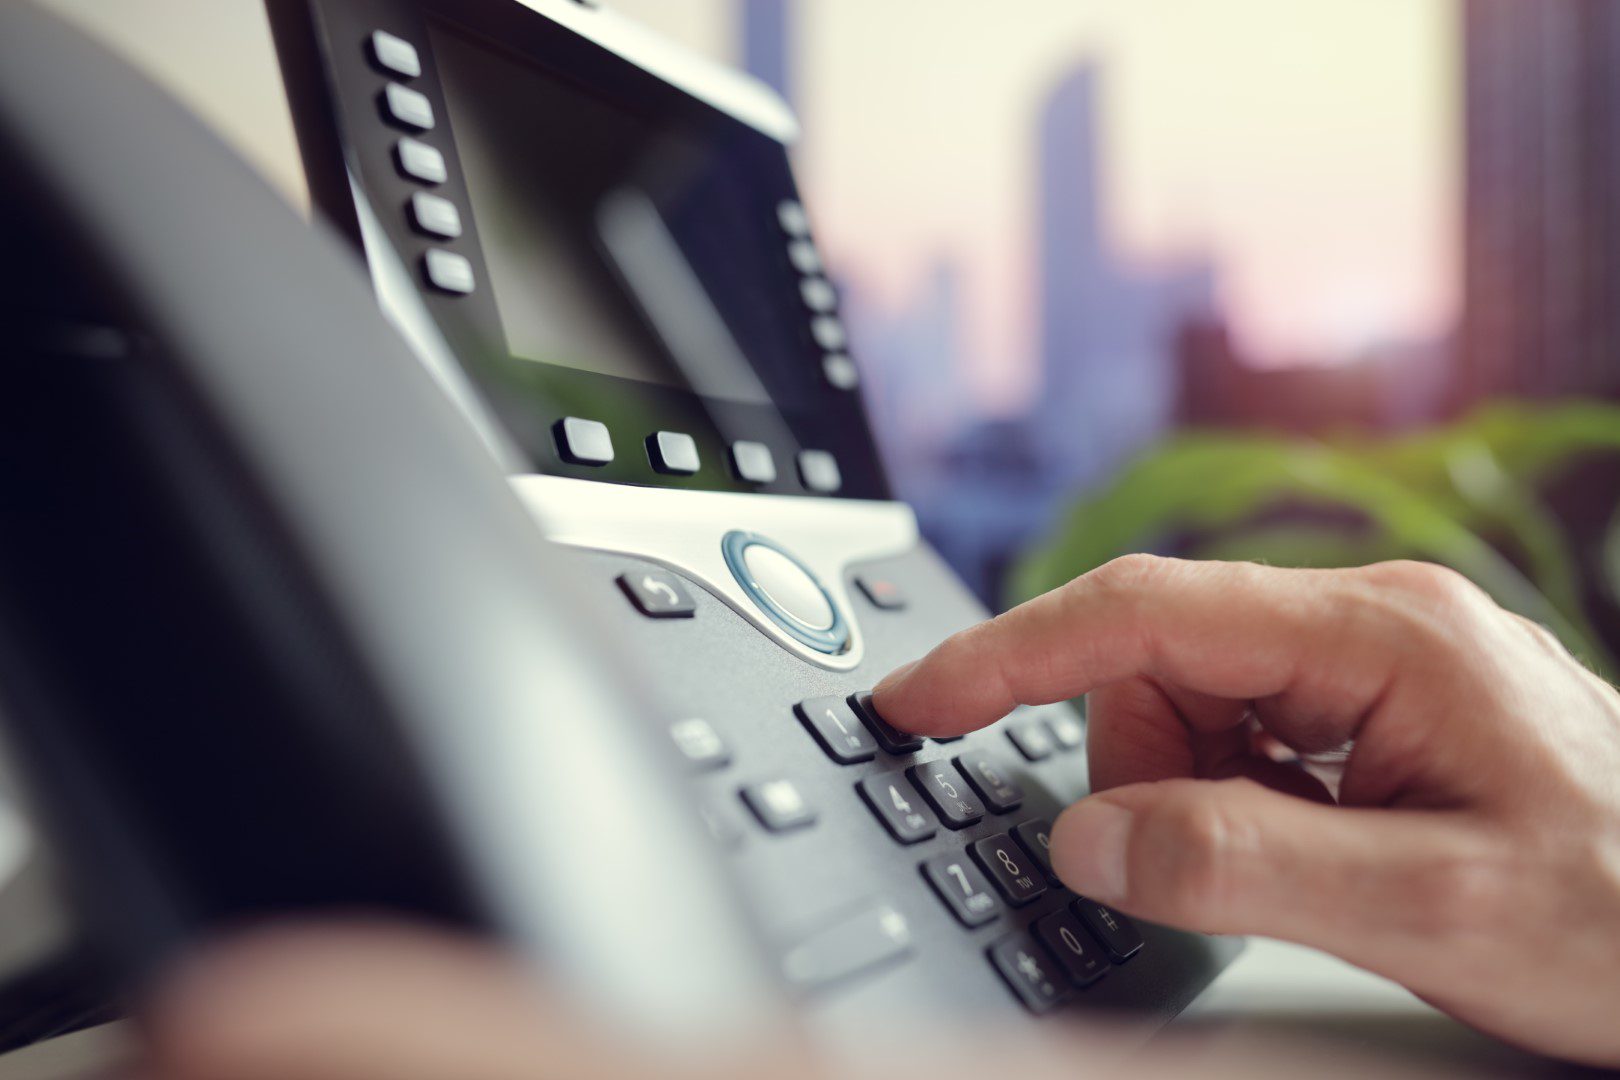 Business Phone System Disaster Recovery for Hospitals